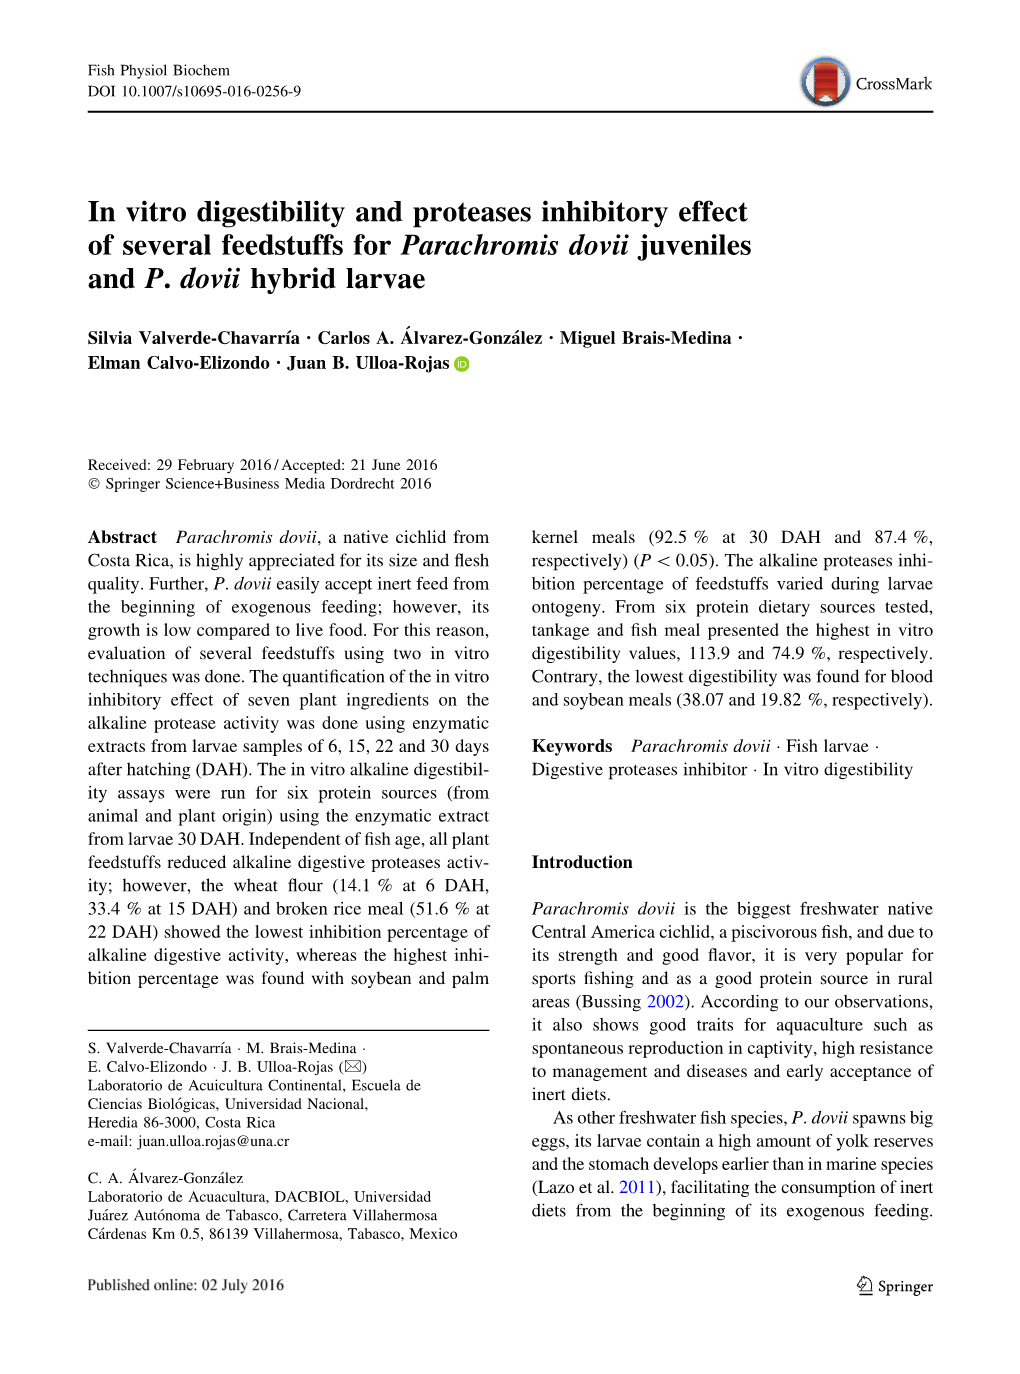 In Vitro Digestibility and Proteases Inhibitory Effect of Several Feedstuffs for Parachromis Dovii Juveniles and P